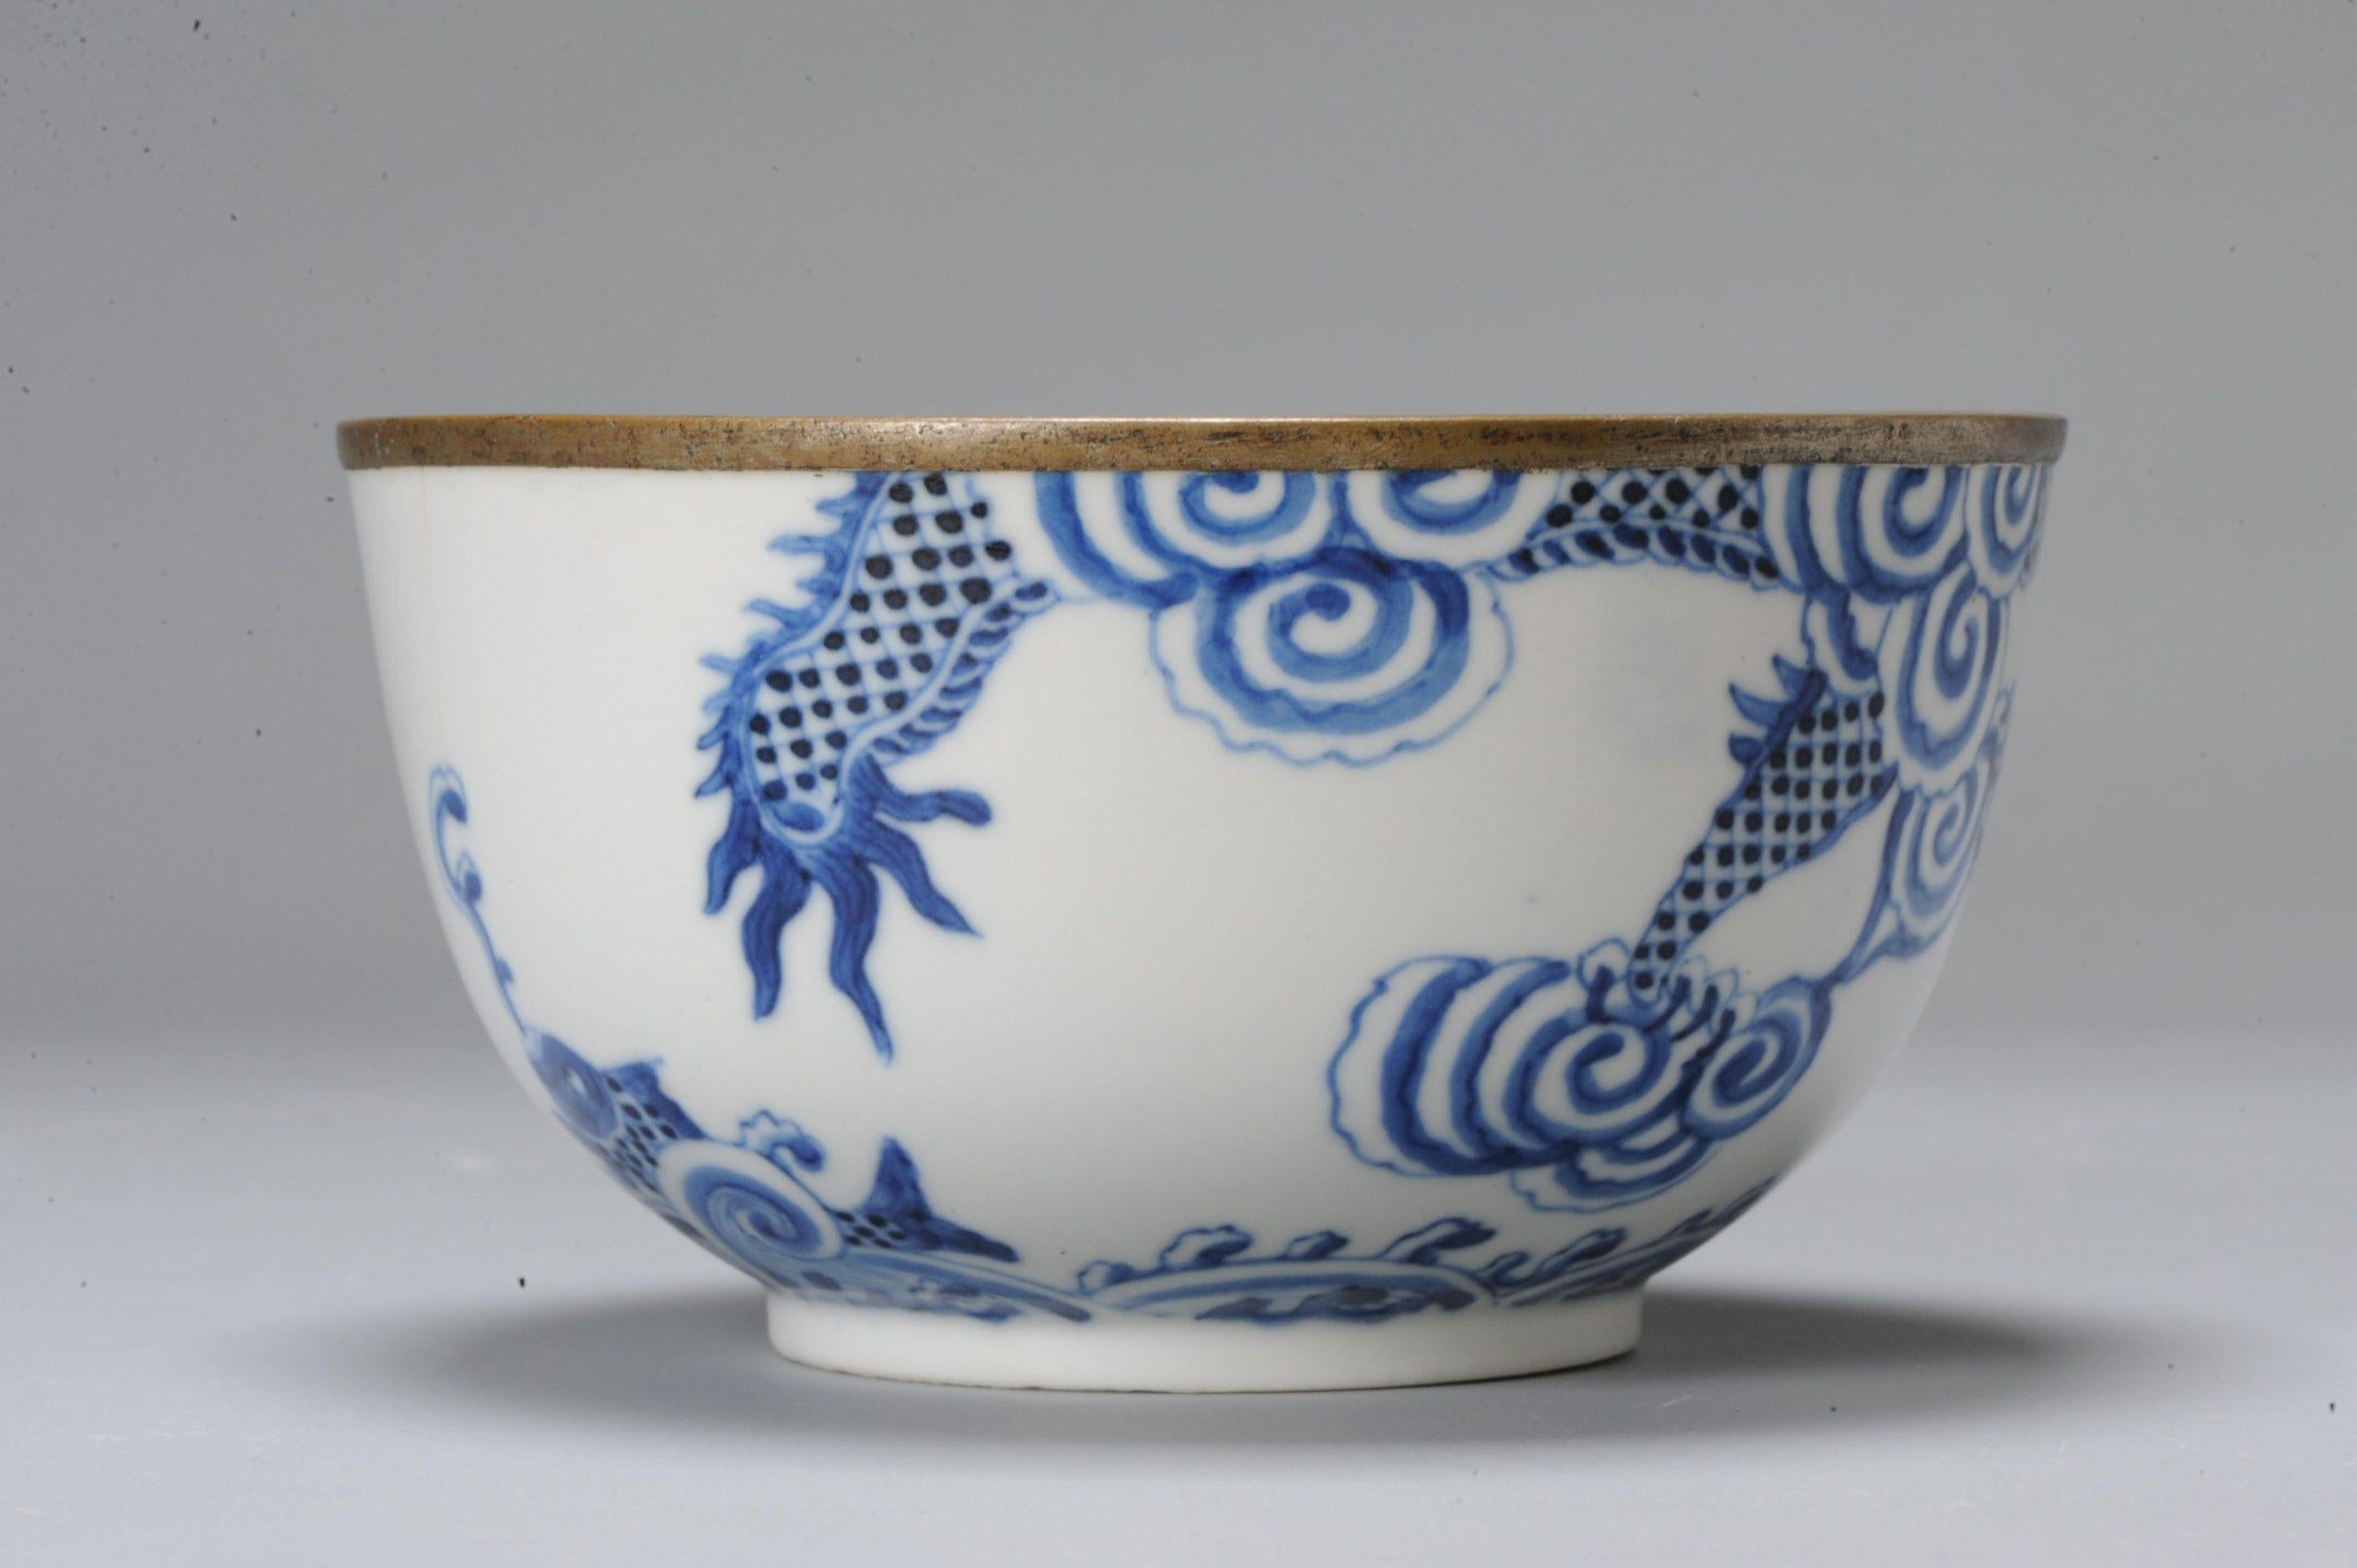 Description

Superb antique Chinese porcelain bowl with a dragon and carp, painted in underglaze cobalt blue on white porcelain ground.

From the 1700s onwards, kings of the Le-Trinh dynasty in Vietnam ordered porcelain from China for their